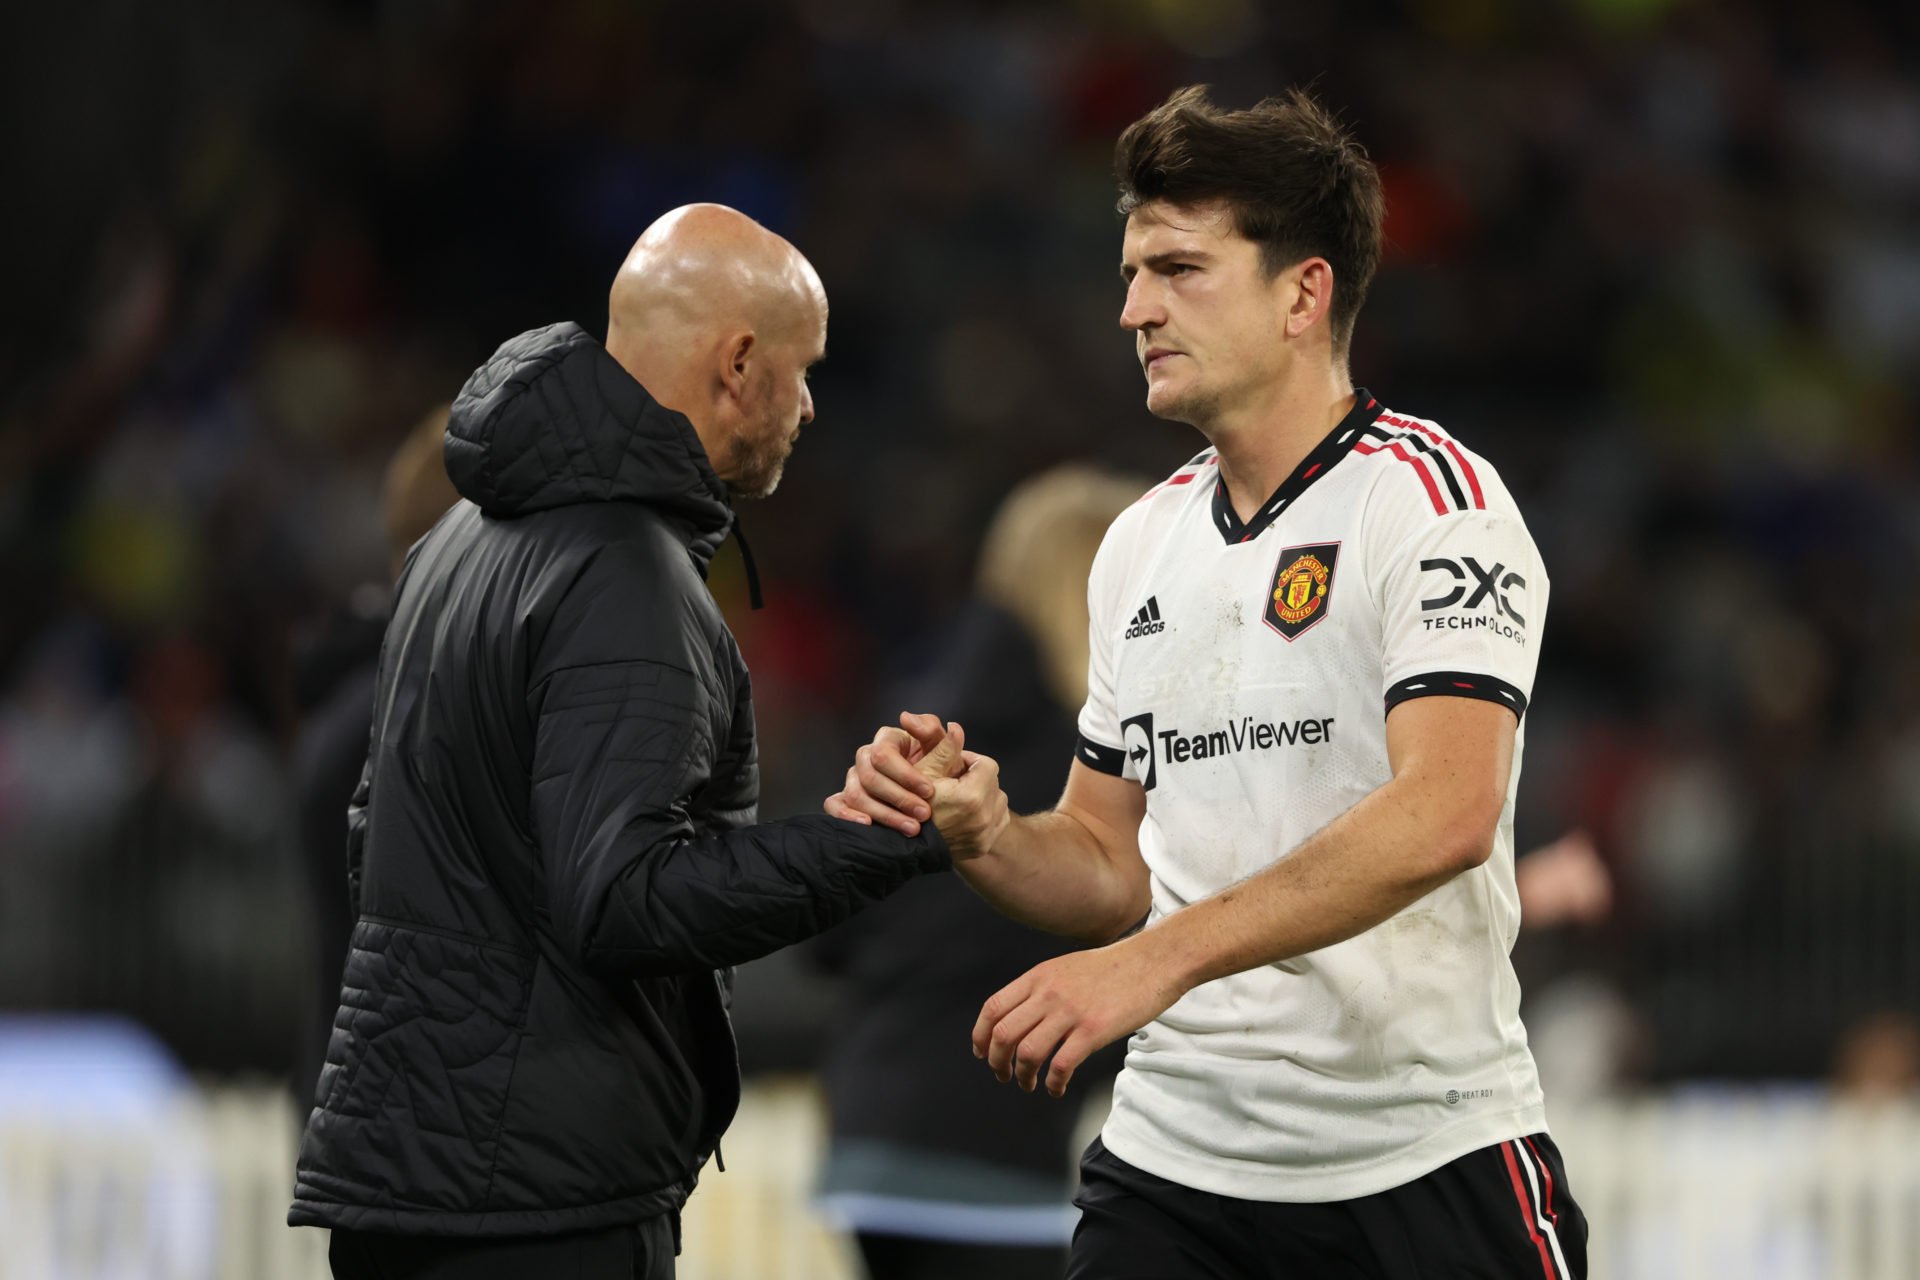 Huge boost for West Ham as Ten Hag makes Maguire situation crystal clear